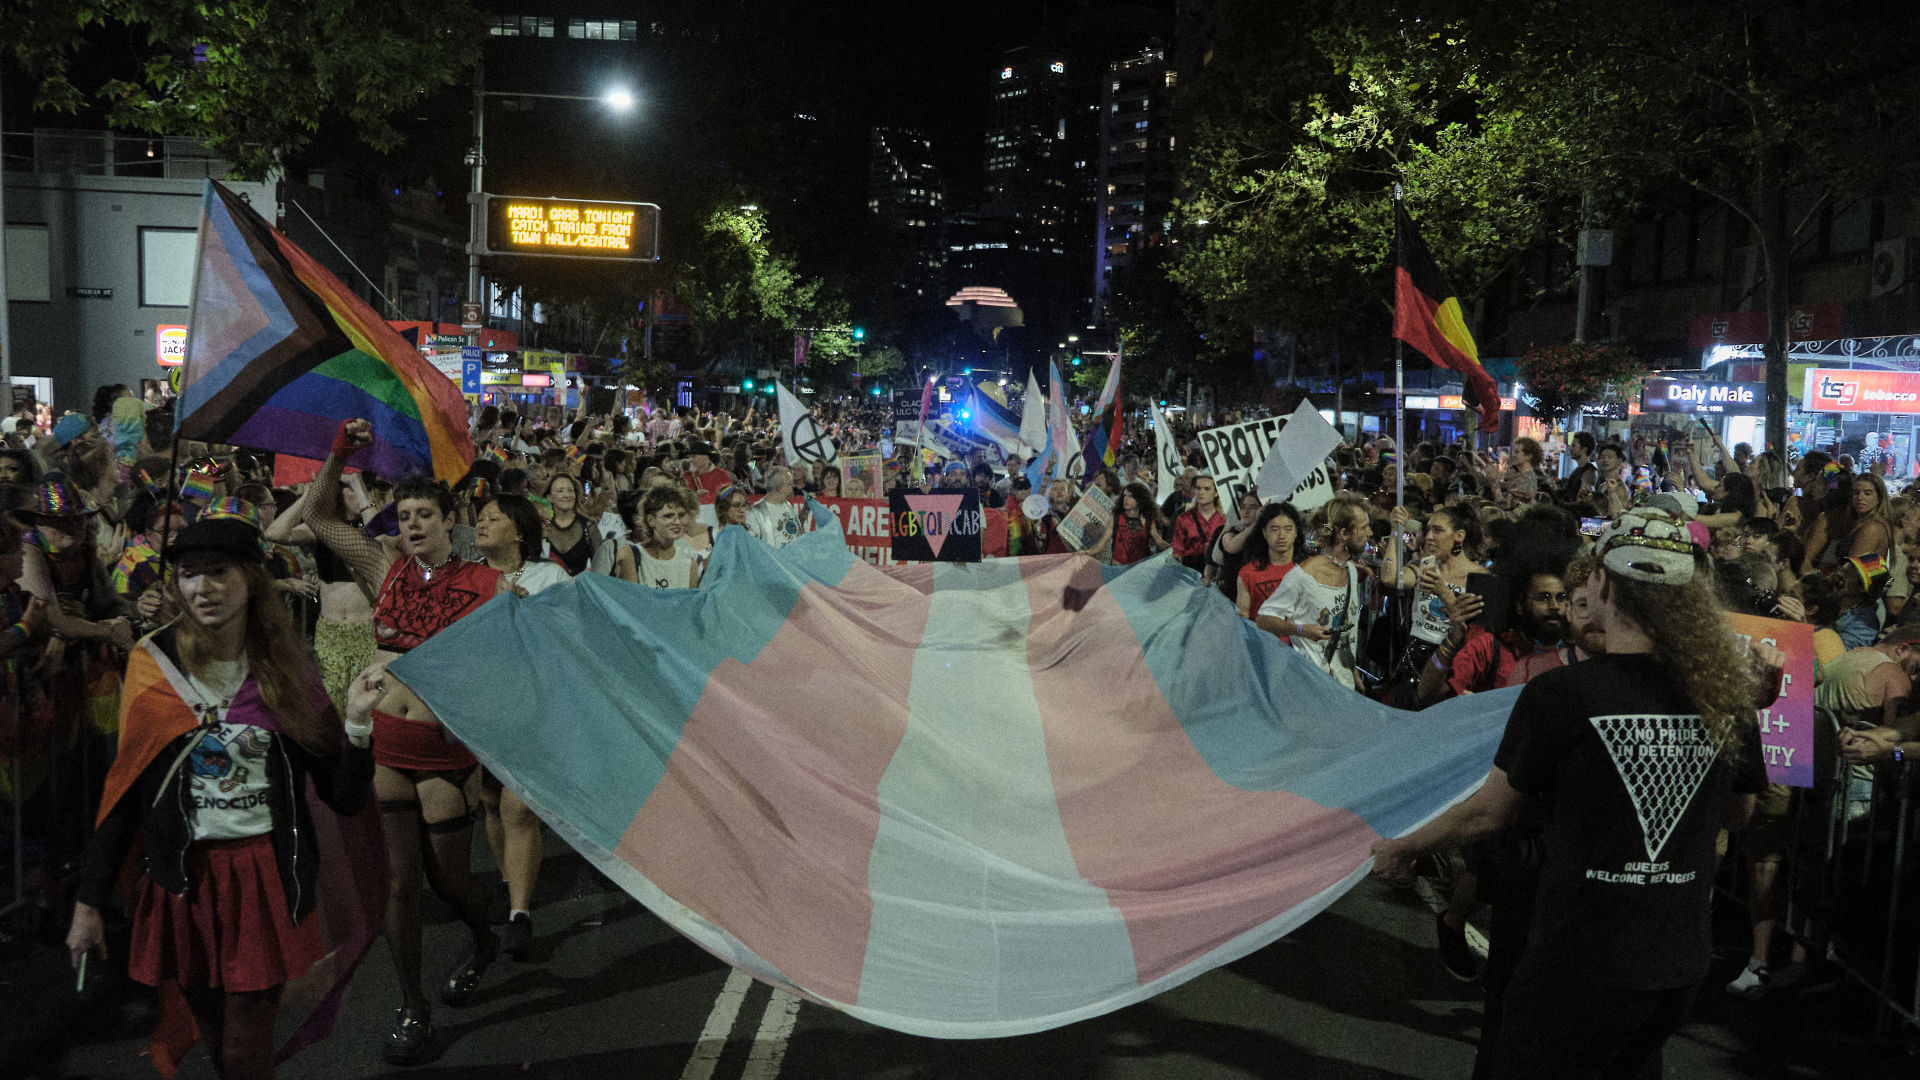 Image: No Pride in Protest at the 2023 Mardi Gras parade Photo by Valerie Joy; @valeriejoy.jpeg